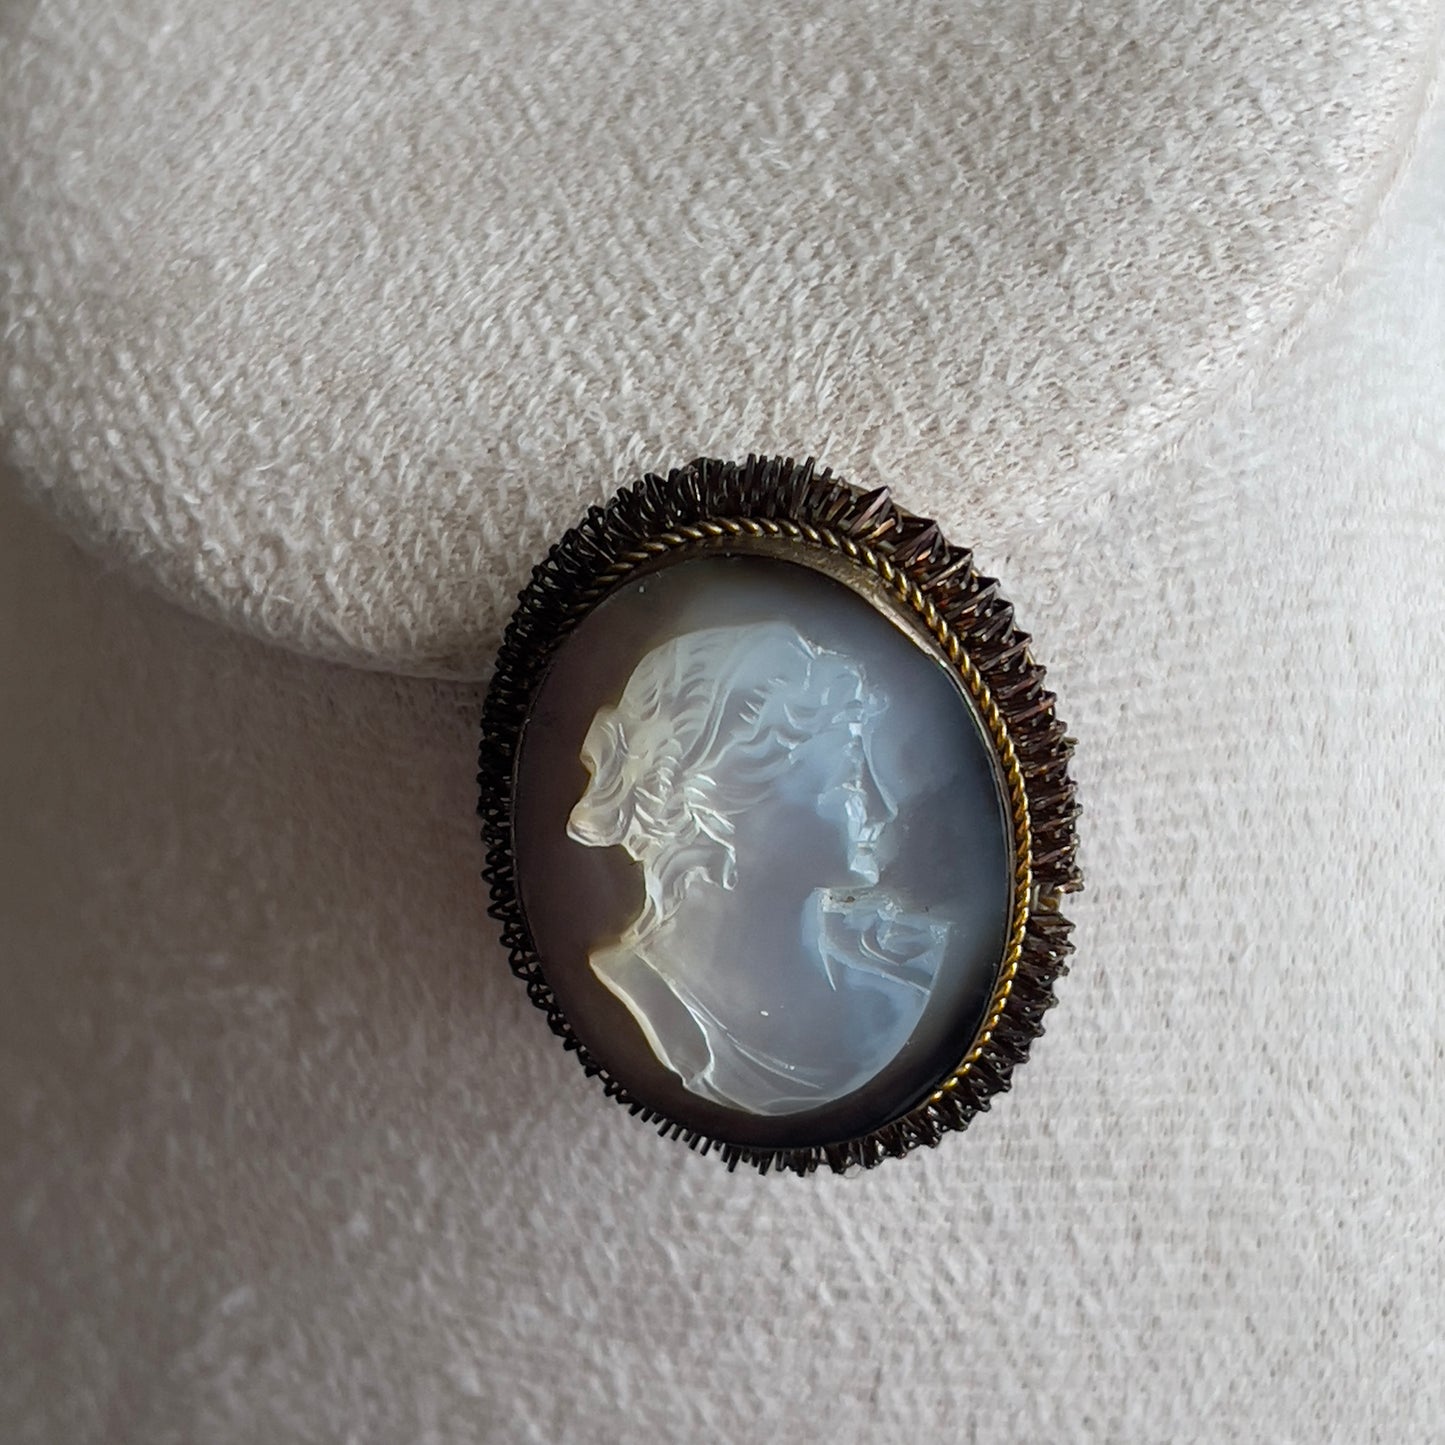 Vintage antique silver Mother of Pearl Carved Cameo brooch & pendant